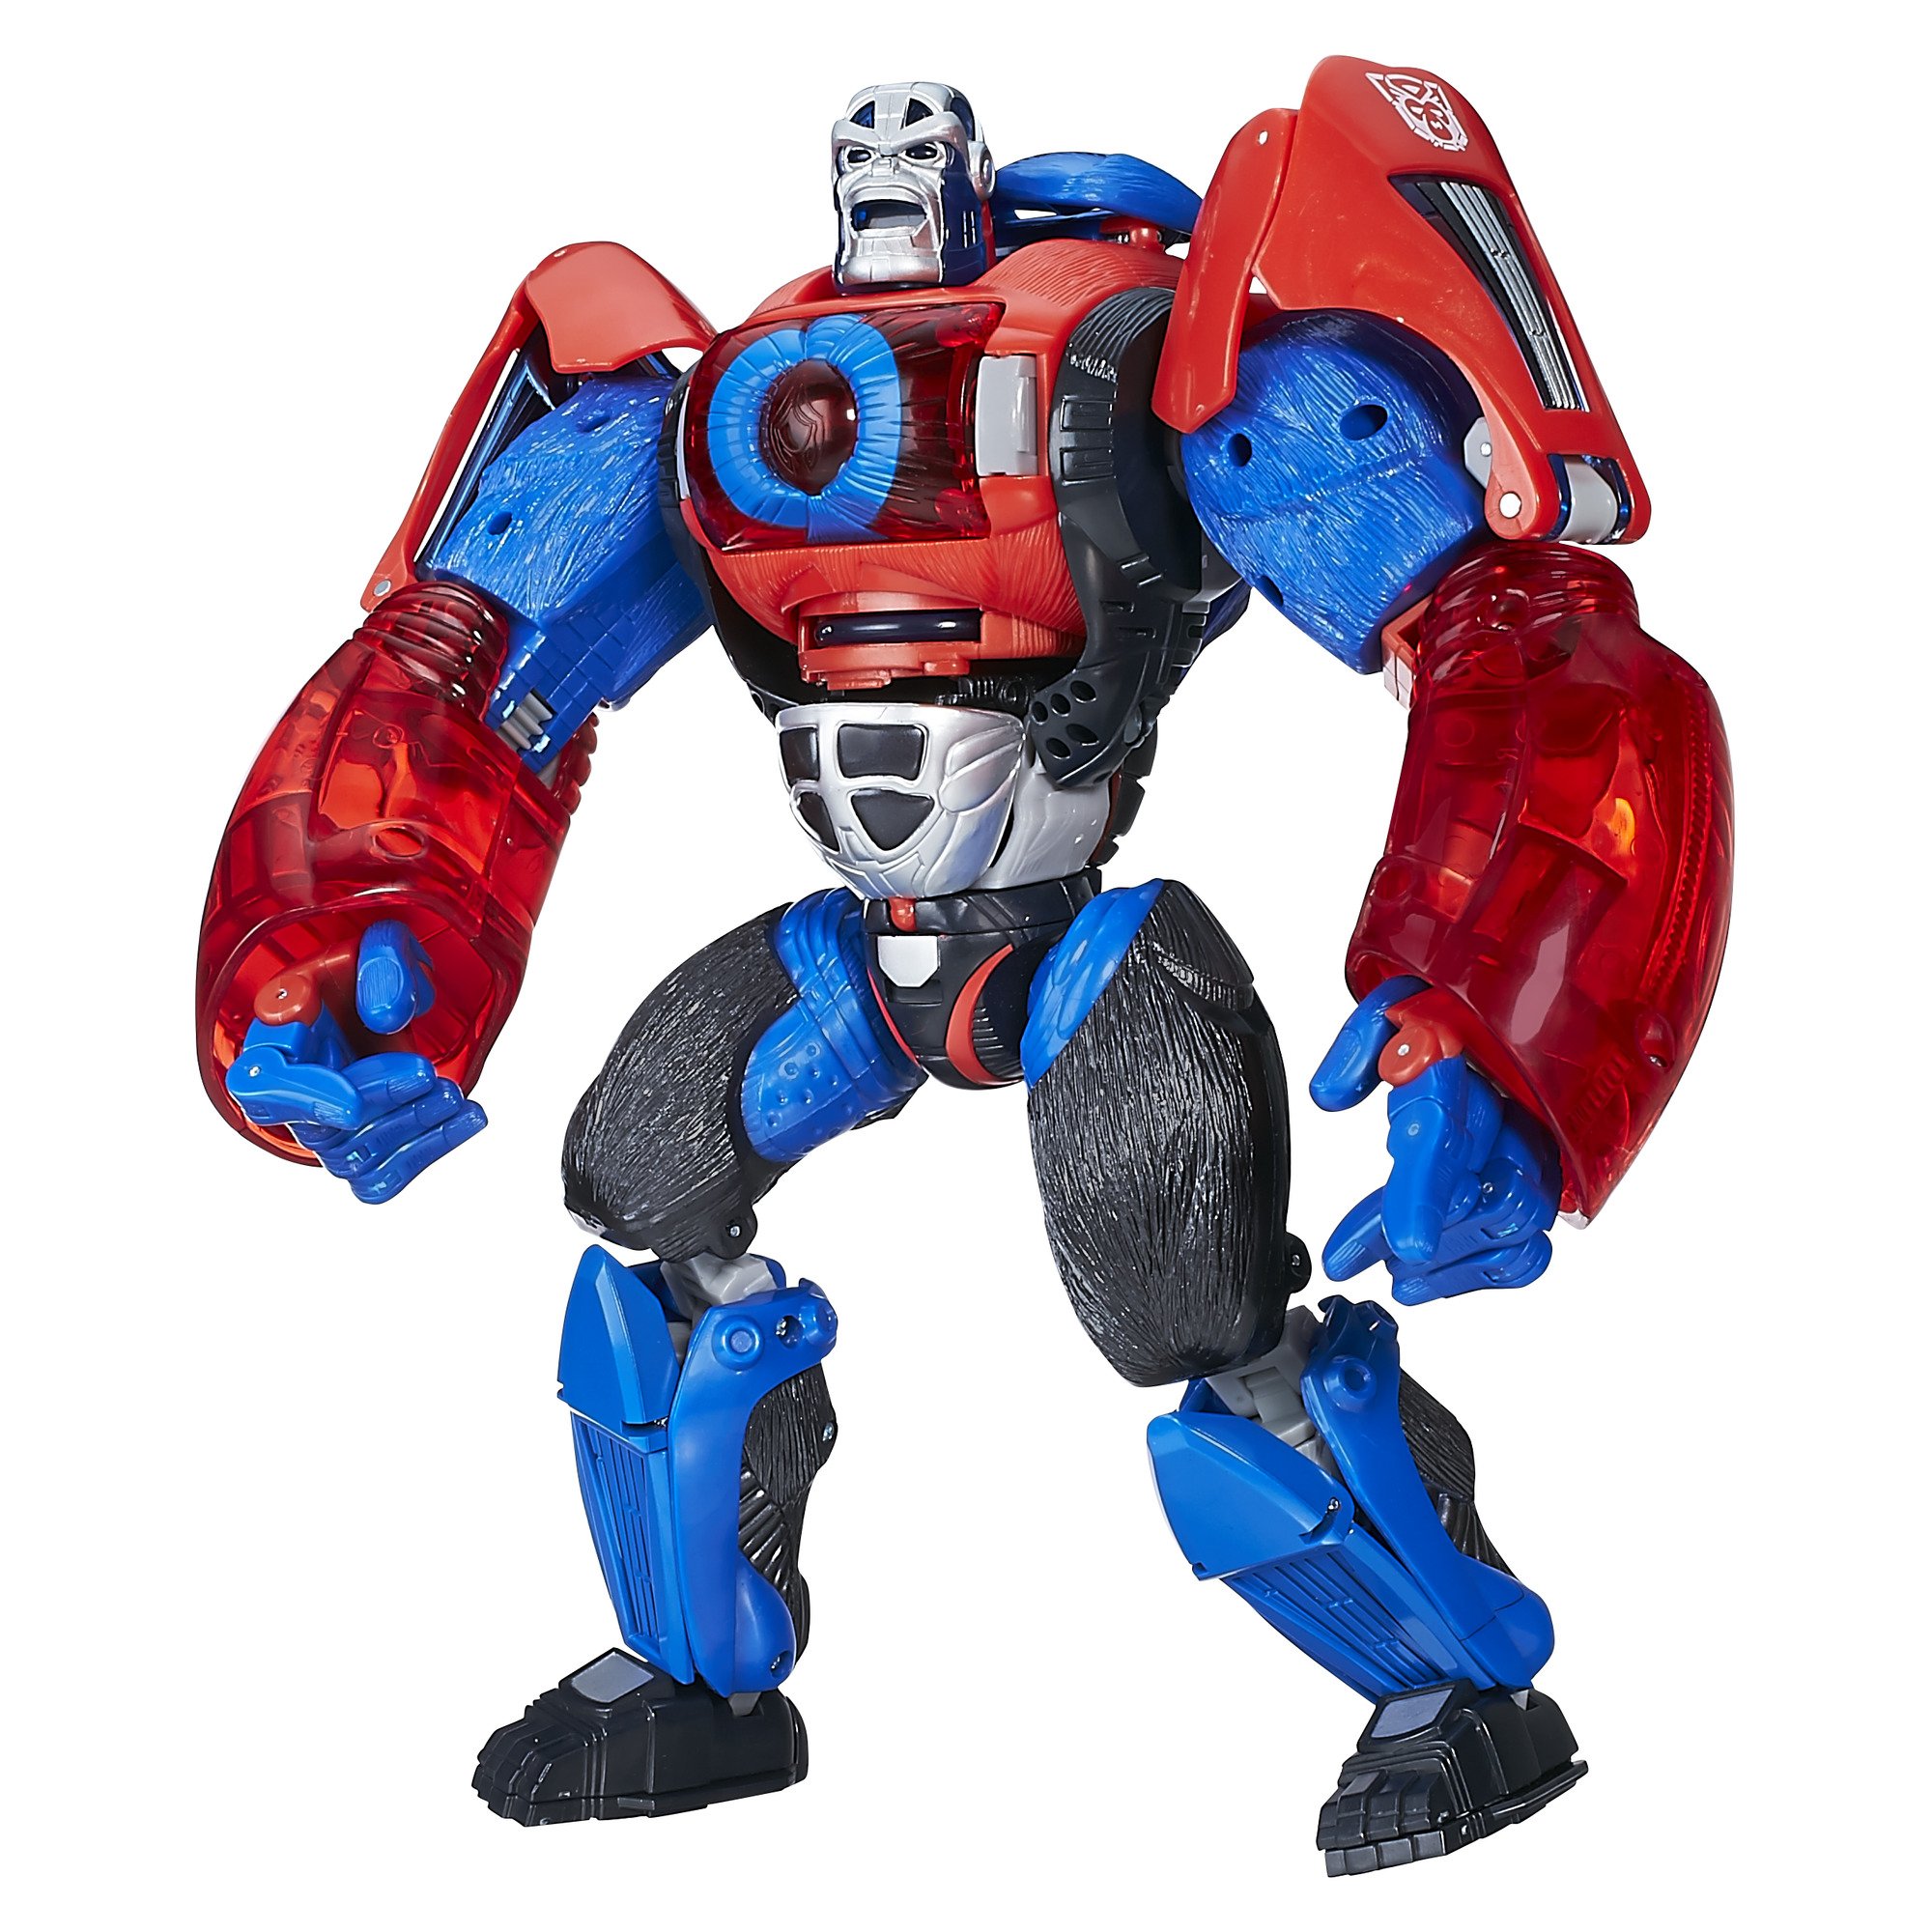 Transformers Generations G2 Computron Collection Action Figure Pack